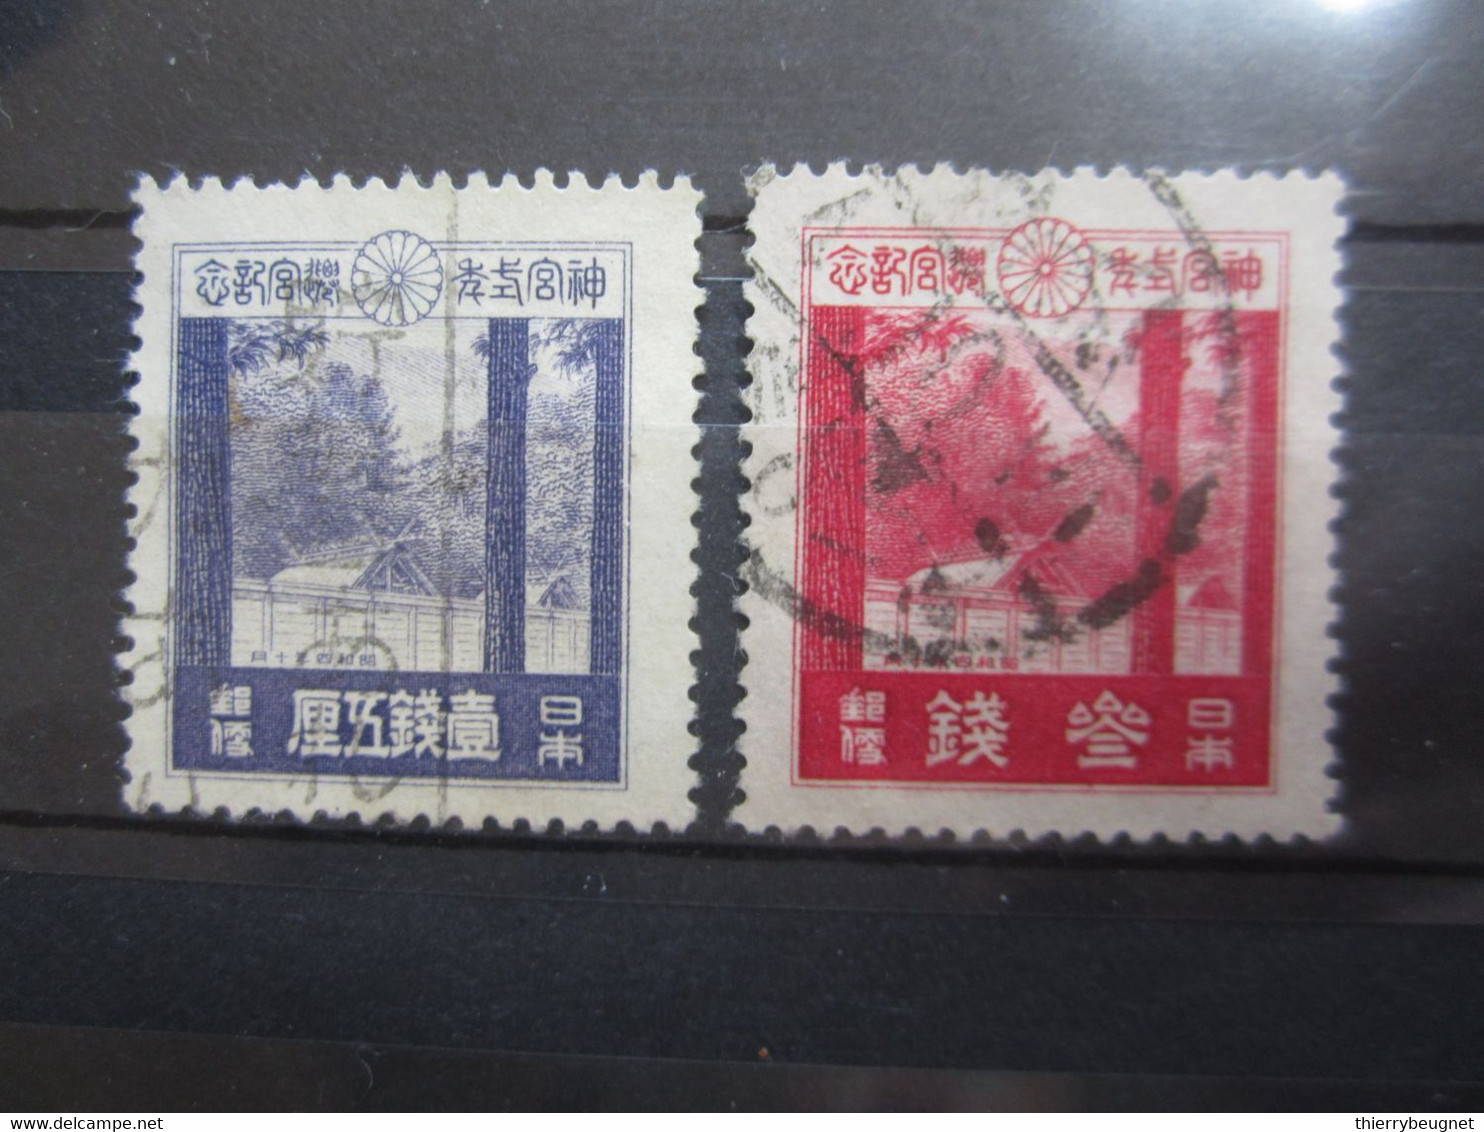 VEND BEAUX TIMBRES DU JAPON N° 207 + 208 !!! - Used Stamps